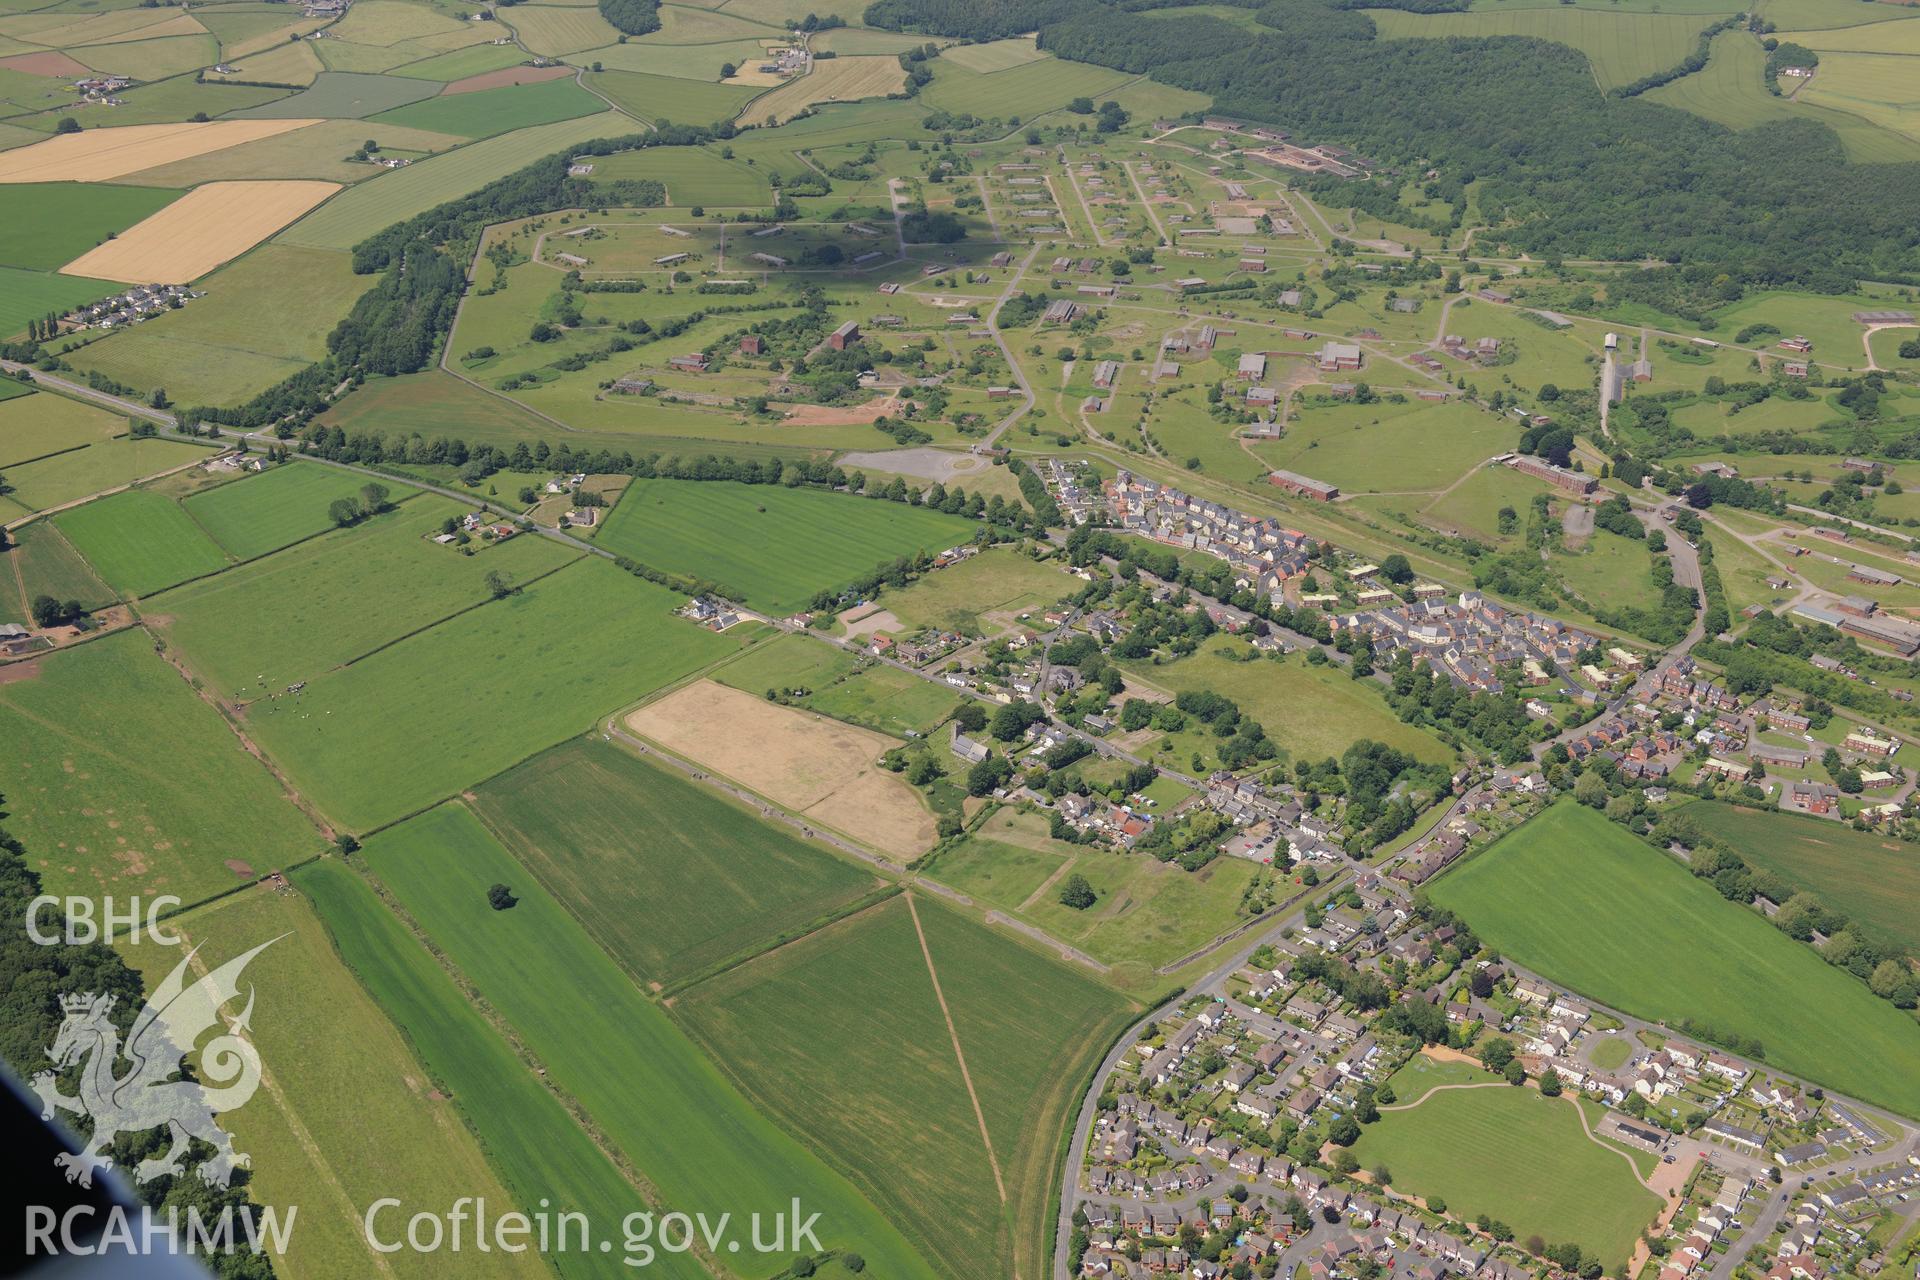 Caerwent Roman town and the Royal Naval Propellant Factory beyond. Oblique aerial photograph taken during the Royal Commission's programme of archaeological aerial reconnaissance by Toby Driver on 29th June 2015.